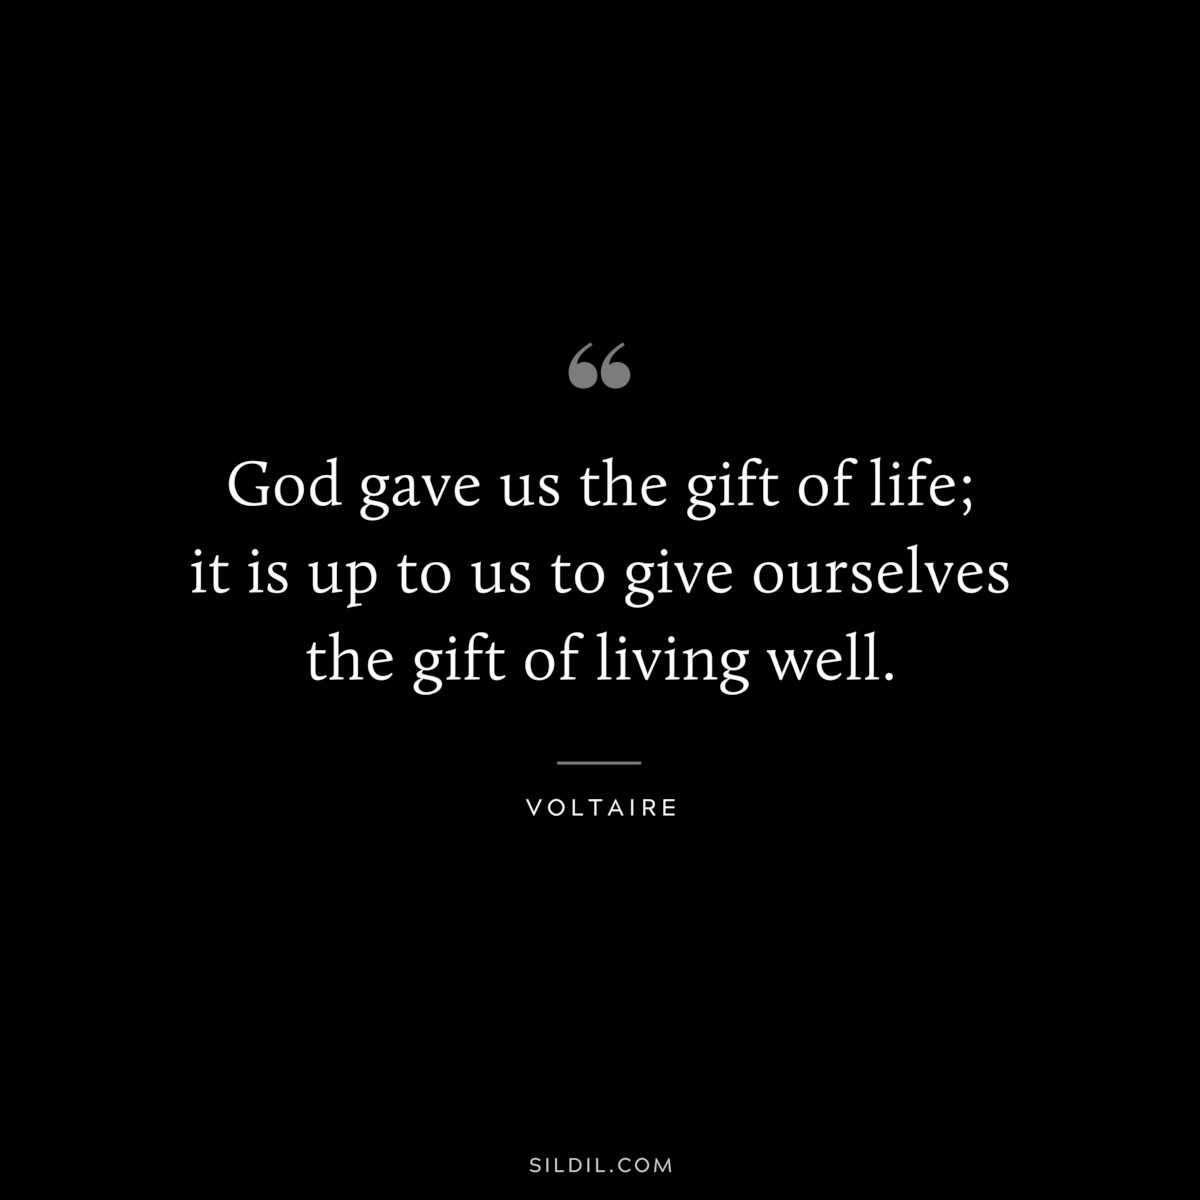 God gave us the gift of life; it is up to us to give ourselves the gift of living well. ― Voltaire